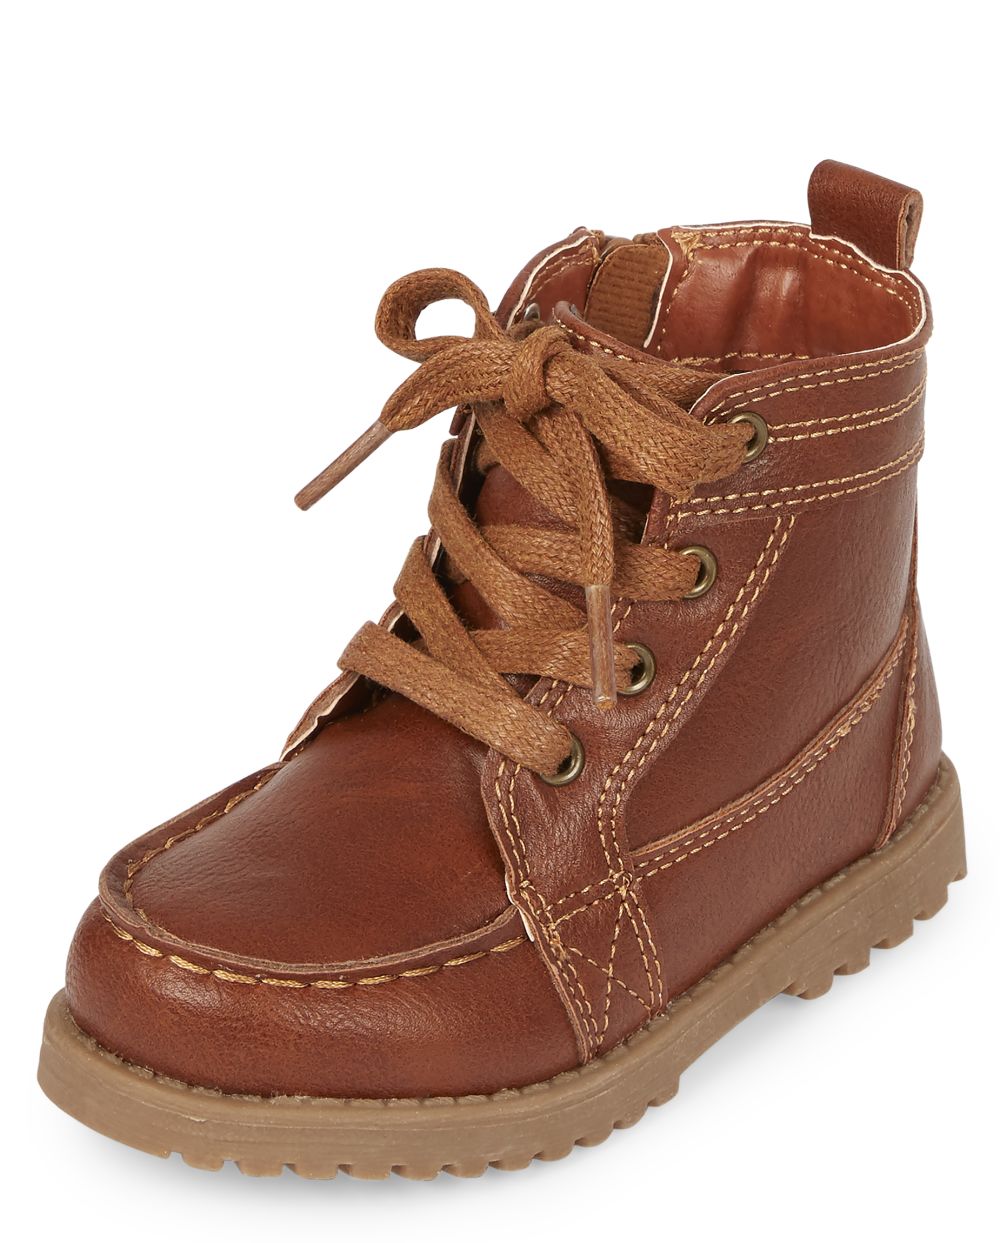 

Baby Boys Toddler Boys Lace Up Boots - Tan - The Children's Place